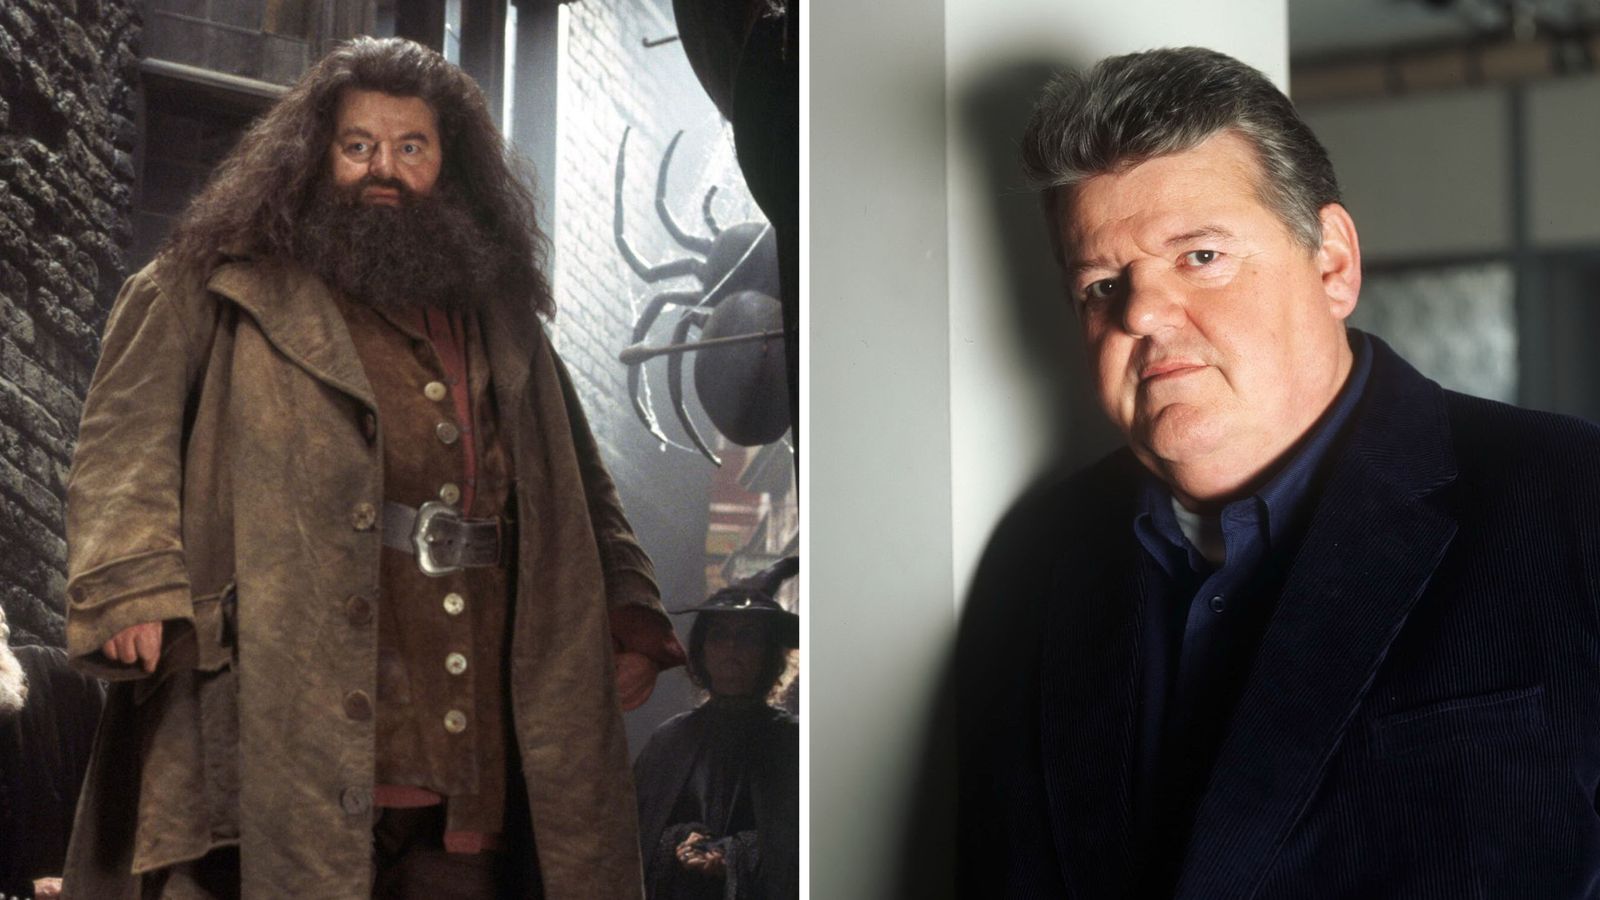 Robbie Coltrane: Harry Potter's Hagrid and Cracker actor has died aged 72